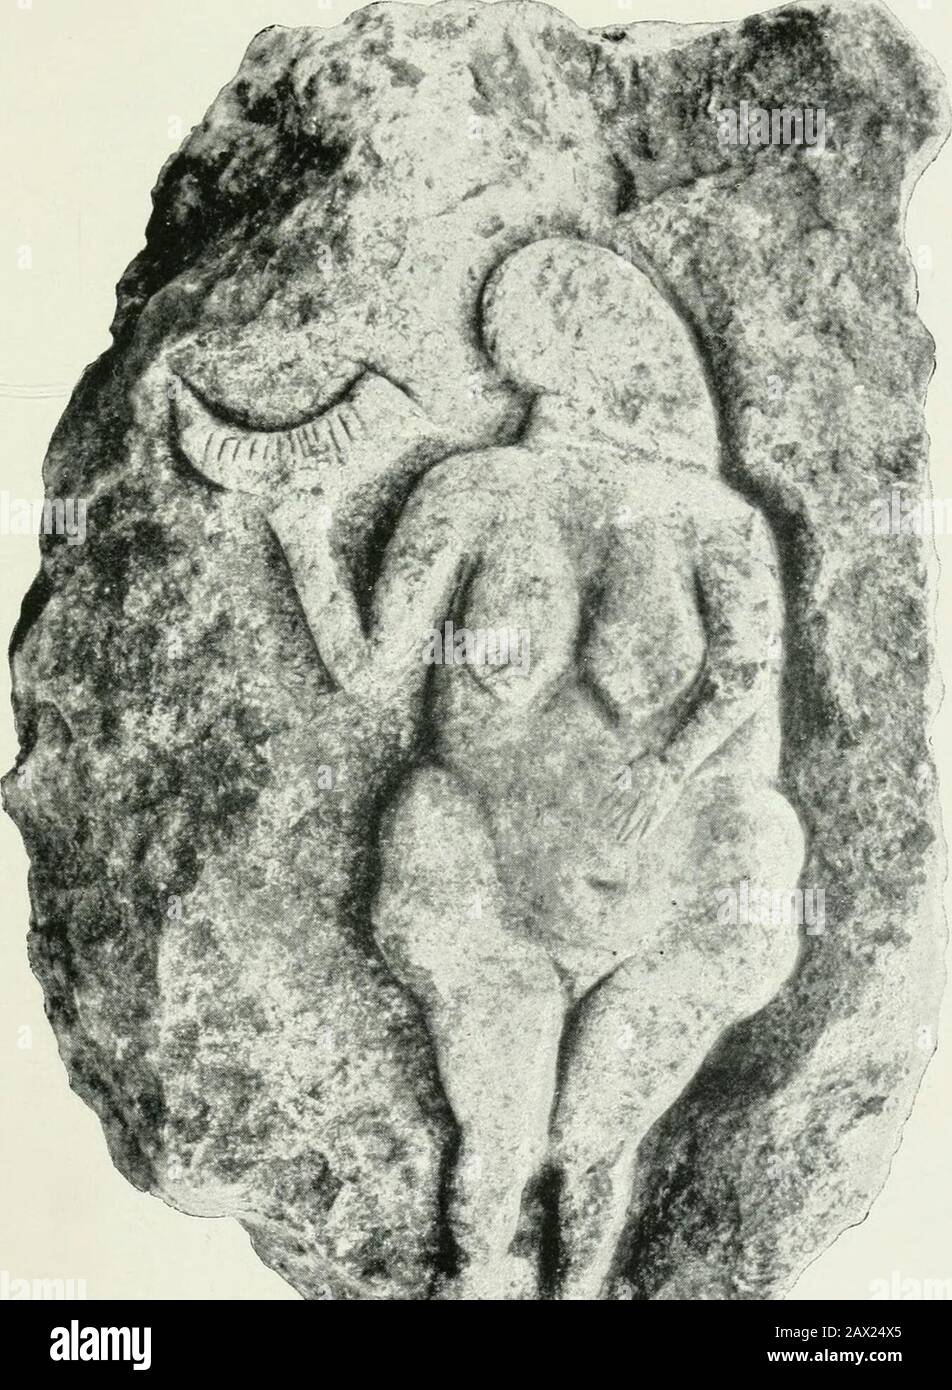 An introduction to the study of prehistoric art . ^ (Plate VI).  female statuette, recalling somewhat that discoveredat Brassempouy, but more complete, comes from the caveof Baousse-Rouss6 at Mentone. It is sculptured in ayellow slightly translucent steatite, and shows head, trunk,and thighs. The head is oval in shape, but no facialfeatures are shown. The forehead is retreating, and athick mass of hair falls on the neck much like that of somearchaic Greek statues (Fig. 53). Three or four otherstatuettes are said to have been found at Mentone, butgreat scepticism has been expressed regarding t Stock Photo